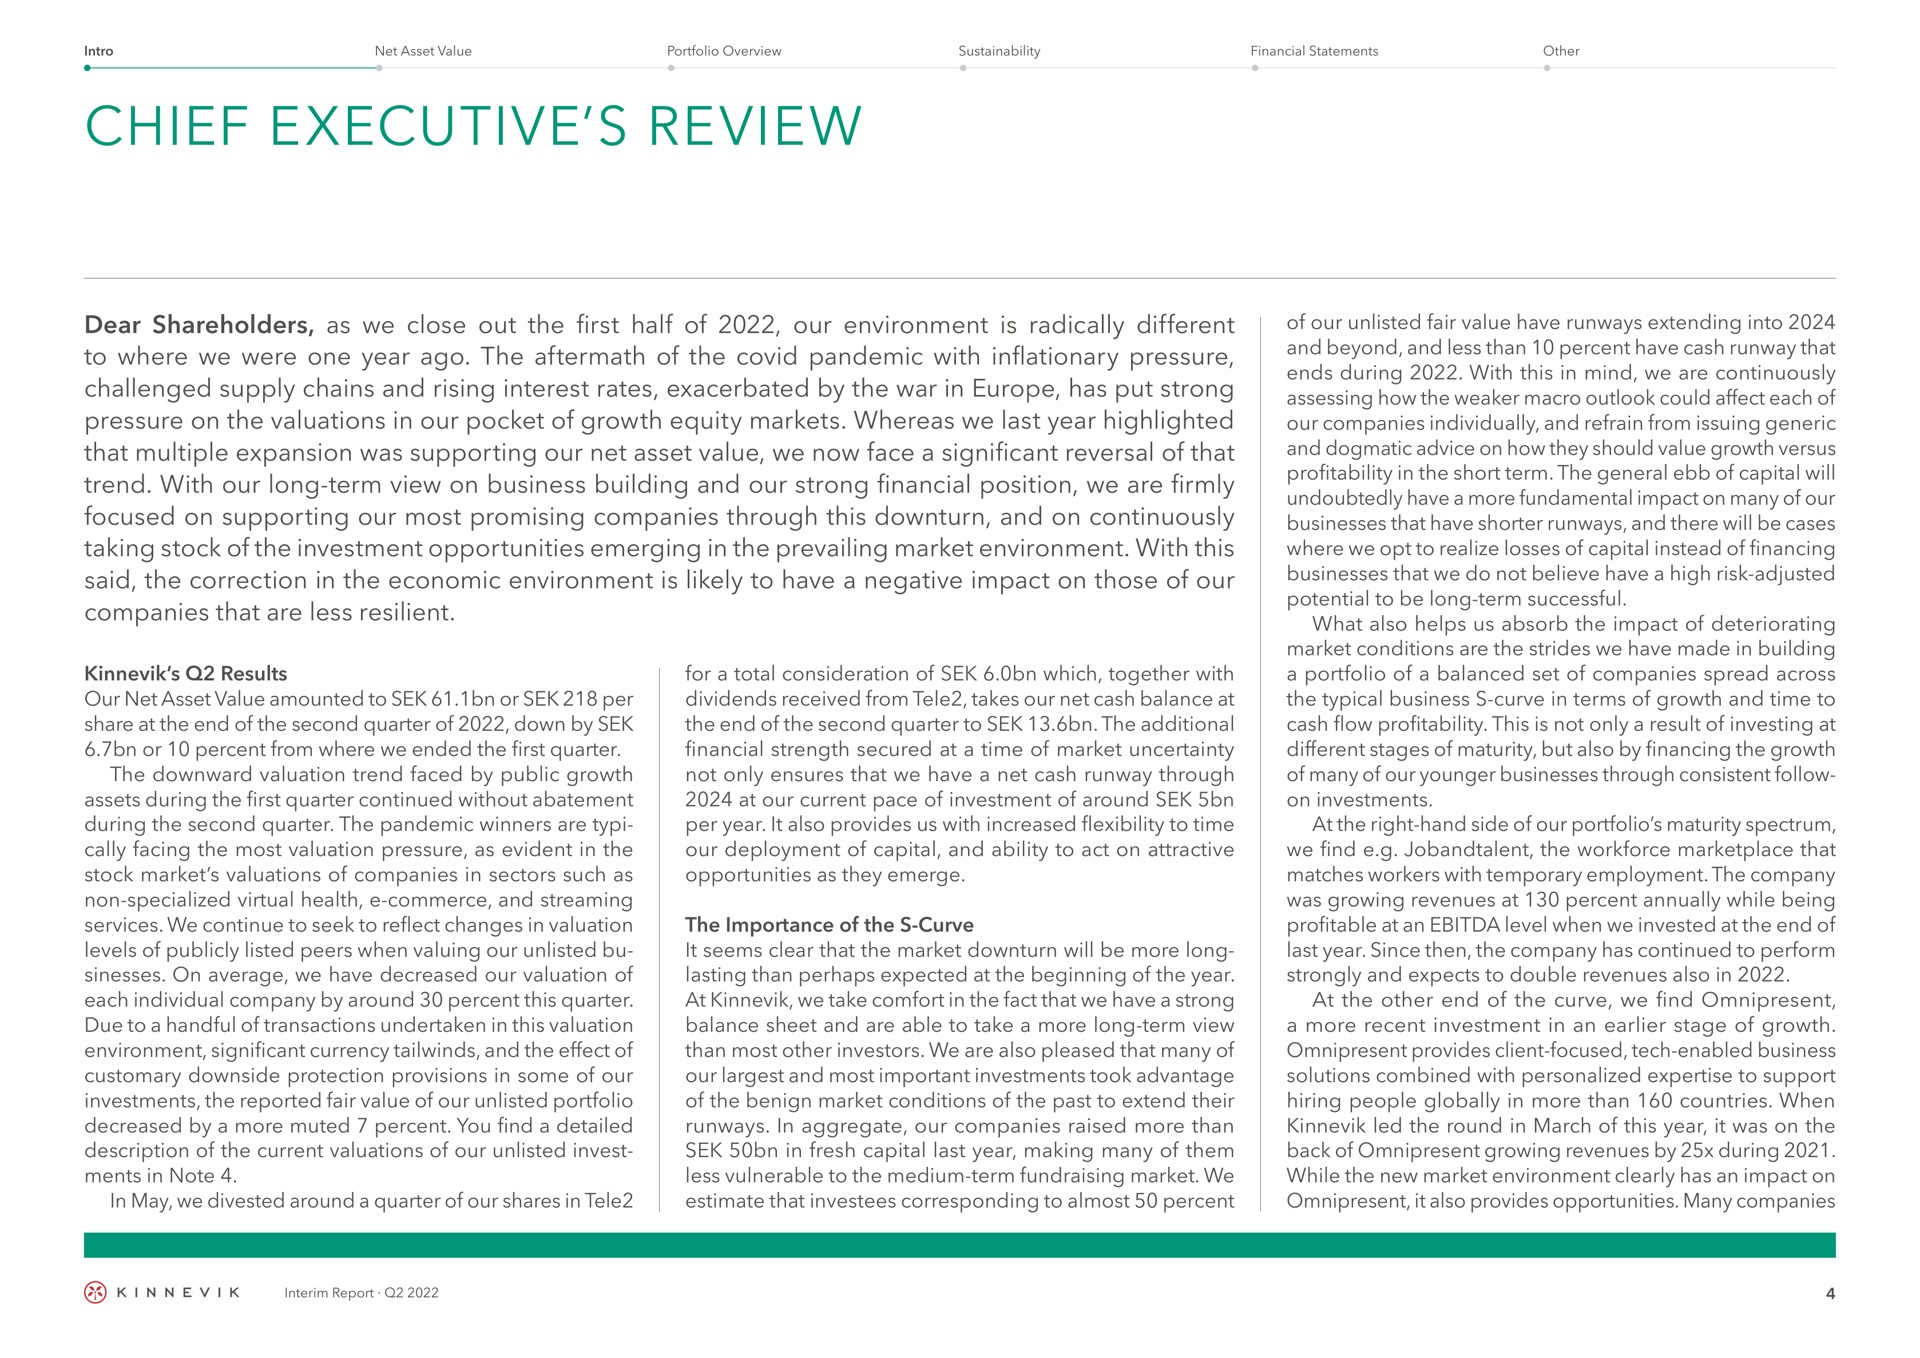 chief executive review dear shareholders as we close out the first half of our environment is radically different to where we were one year ago the aftermath of the covid pandemic with inflationary pressure challenged supply chains and rising interest rates exacerbated by the war in has put strong pressure on the valuations in our pocket of growth equity markets whereas we last year highlighted that multiple expansion was supporting our net asset value we now face a significant reversal of that trend with our long term view on business building and our strong financial position we are firmly focused on supporting our most promising companies through this downturn and on continuously taking stock of the investment opportunities emerging in the prevailing market environment with this said the correction in the economic environment is likely to have a negative impact on those of our companies that are less resilient results our net asset value amounted to or per share at the end of the second quarter of down by or percent from where we ended the first quarter the downward valuation trend faced by public growth assets during the first quarter continued without abatement during the second quarter the pandemic winners are facing the most valuation pressure as evident in the stock market valuations of companies in sectors such as non specialized virtual health commerce and streaming services we continue to seek to reflect changes in valuation levels of publicly listed peers when valuing our unlisted sinesses on average we have decreased our valuation of each individual company by around percent this quarter due to a handful of transactions undertaken in this valuation environment significant currency and the effect of customary downside protection provisions in some of our investments the reported fair value of our unlisted portfolio decreased by a more muted percent you find a detailed description of the current valuations of our unlisted invest in note in may we divested around a quarter of our shares in tele for a total consideration of which together with dividends received from tele takes our net cash balance at the end of the second quarter to the additional financial strength secured at a time of market uncertainty not only ensures that we have a net cash runway through at our current pace of investment of around per year it also provides us with increased flexibility to time our deployment of capital and ability to act on attractive opportunities as they emerge the importance of the curve it seems clear that the market downturn will be more long lasting than perhaps expected at the beginning of the year at we take comfort in the fact that we have a strong balance sheet and are able to take a more long term view than most other investors we are also pleased that many of our and most important investments took advantage of the benign market conditions of the past to extend their runways in aggregate our companies raised more than in fresh capital last year making many of them less vulnerable to the medium term market we estimate that corresponding to almost percent of our unlisted fair value have runways extending into and beyond and less than percent have cash runway that ends during with this in mind we are continuously assessing how the macro outlook could affect each of our companies individually and refrain from issuing generic and dogmatic advice on how they should value growth versus profitability in the short term the general ebb of capital will undoubtedly have a more fundamental impact on many of our businesses that have shorter runways and there will be cases where we opt to realize losses of capital instead of financing businesses that we do not believe have a high risk adjusted potential to be long term successful what also helps us absorb the impact of deteriorating market conditions are the strides we have made in building a portfolio of a balanced set of companies spread across the typical business curve in terms of growth and time to cash flow profitability this is not only a result of investing at different stages of maturity but also by financing the growth of many of our younger businesses through consistent follow on investments at the right hand side of our portfolio maturity spectrum we find the that matches workers with temporary employment the company was growing revenues at percent annually while being profitable at an level when we invested at the end of last year since then the company has continued to perform strongly and expects to double revenues also in at the other end of the curve we find omnipresent a more recent investment in an stage of growth omnipresent provides client focused tech enabled business solutions combined with personalized to support hiring people globally in more than countries when led the round in march of this year it was on the back of omnipresent growing revenues by during while the new market environment clearly has an impact on omnipresent it also provides opportunities many companies | Kinnevik